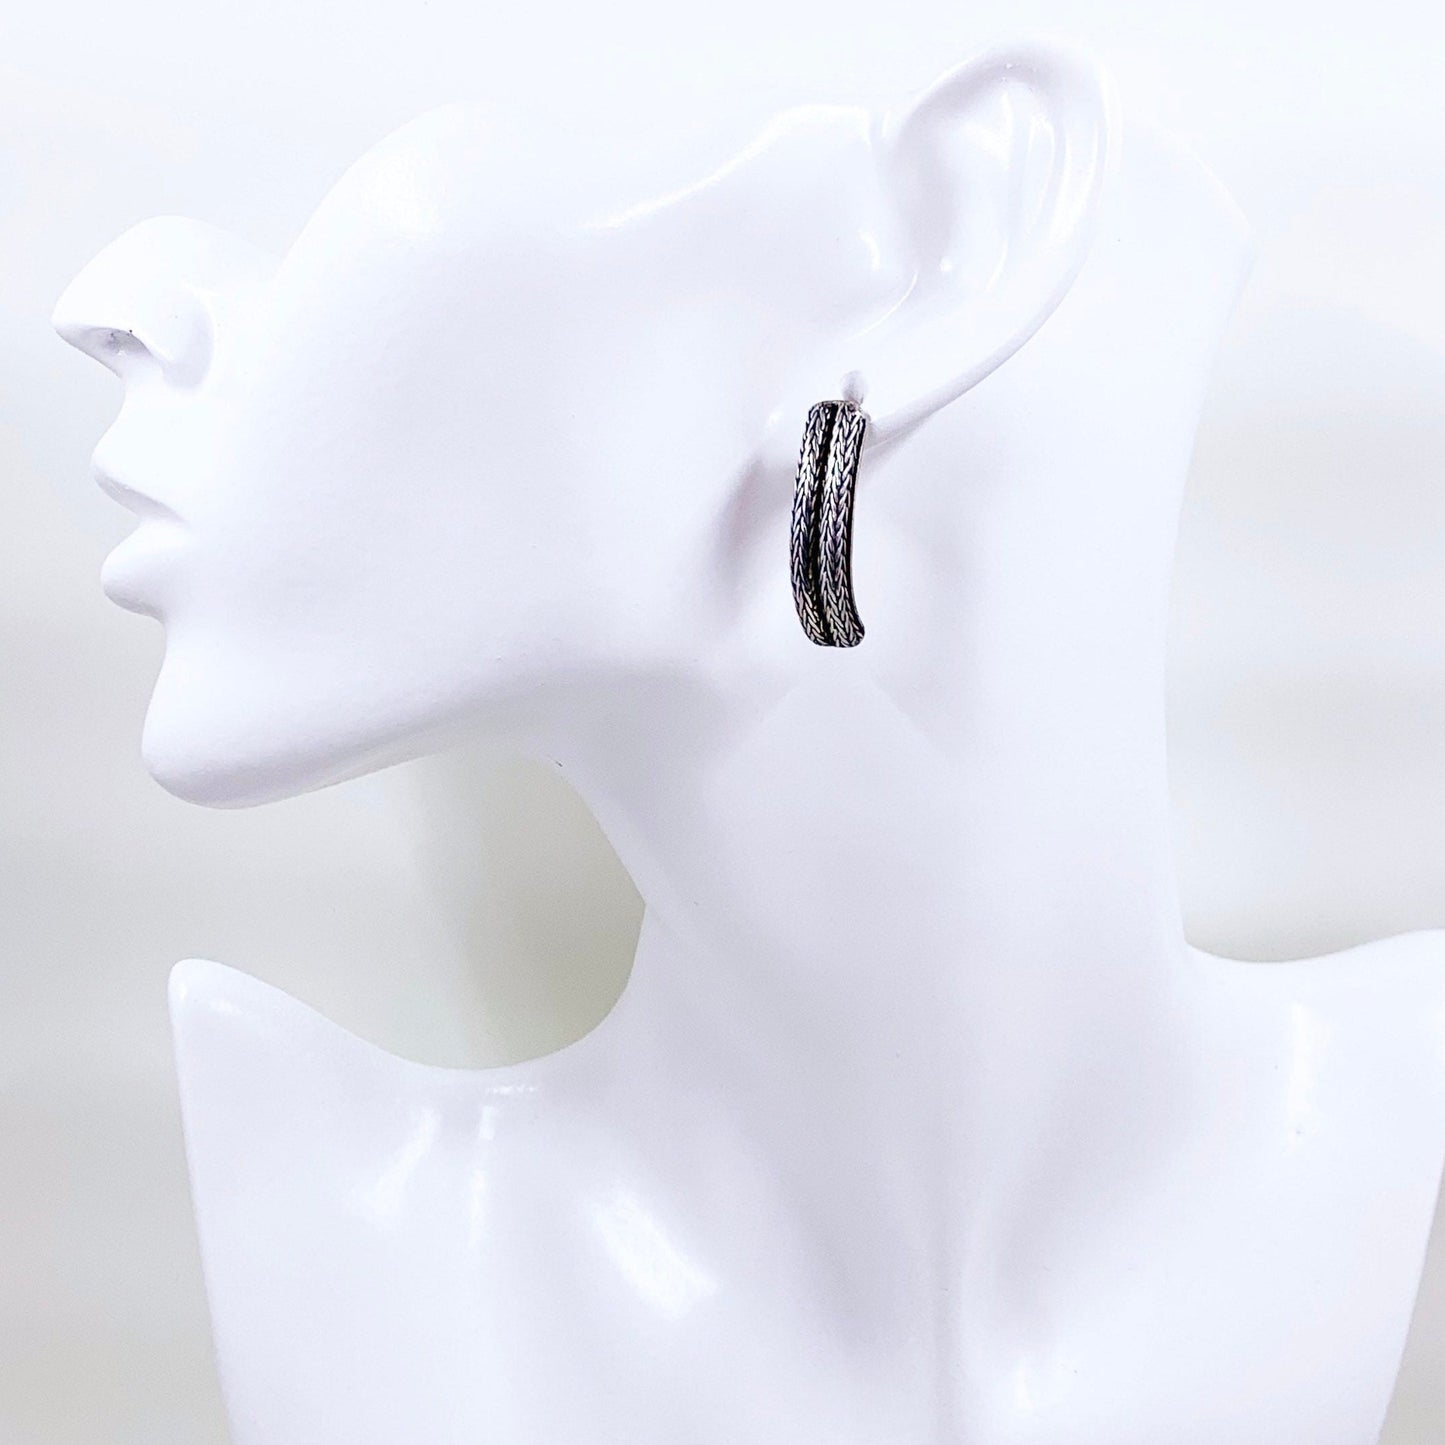 Vintage Silver Braided Cable Earrings